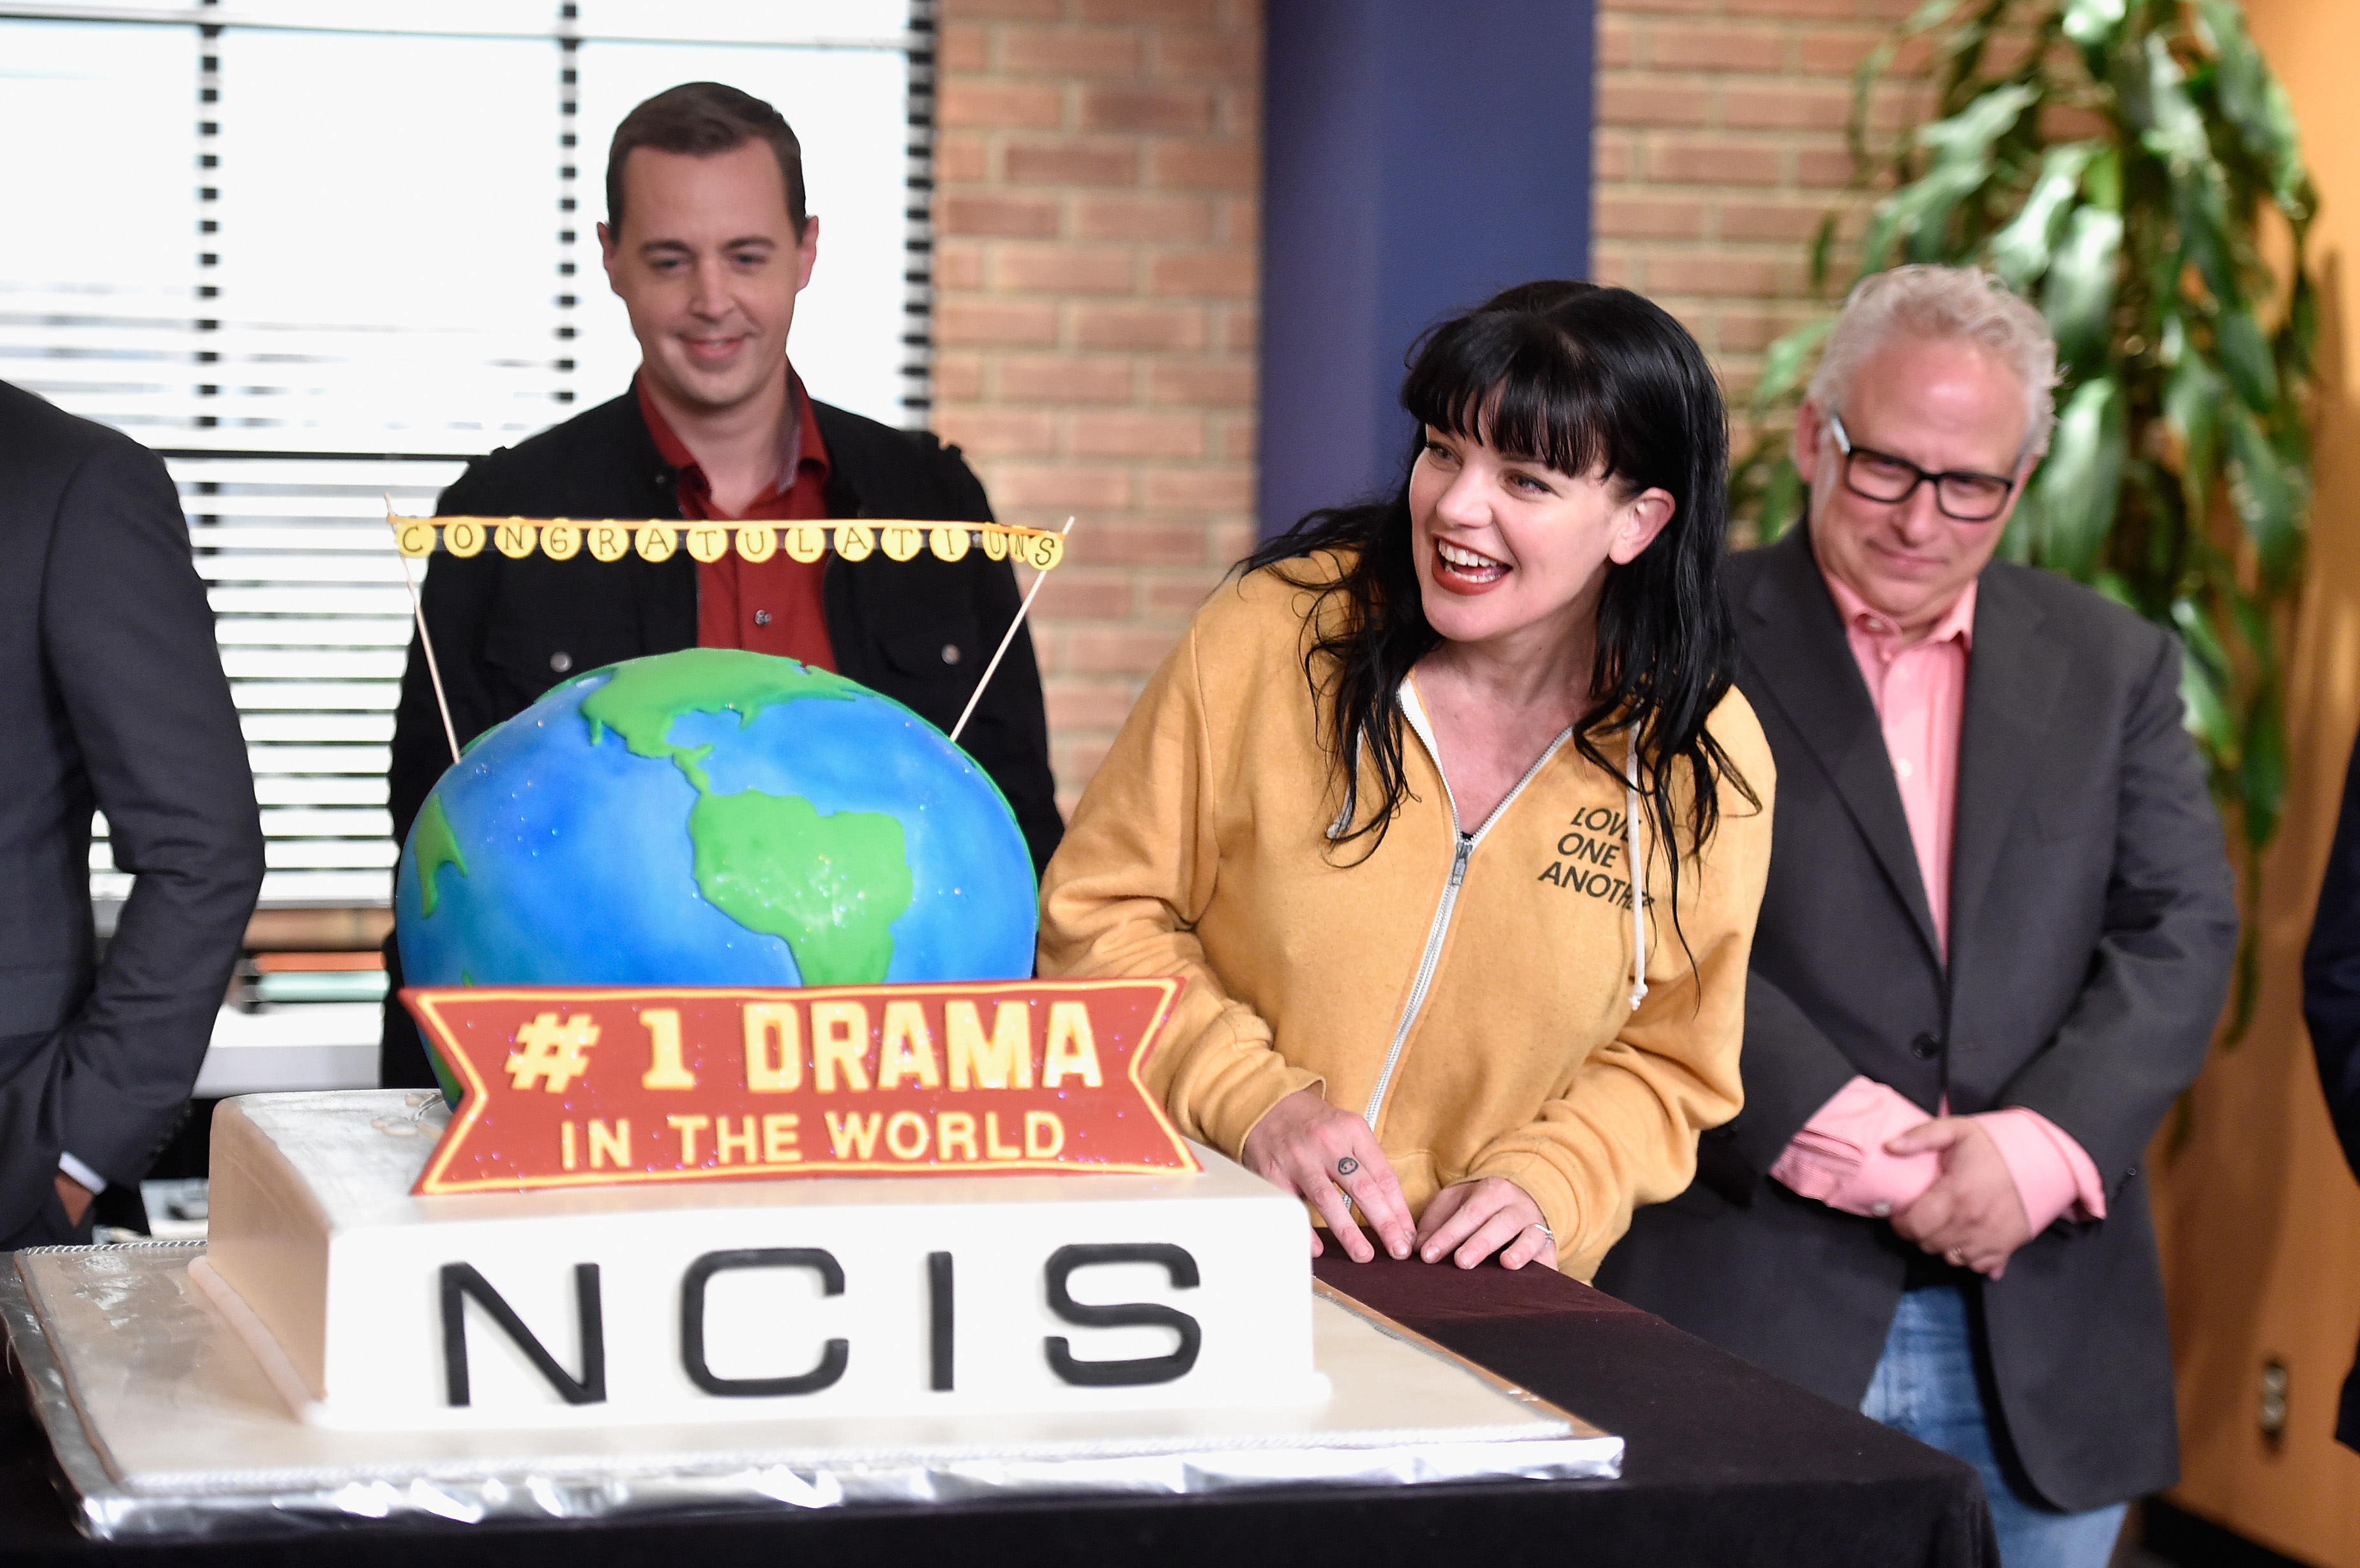 Pauley Perrette and other "NCIS" cast members at the Monte-Carlo Television Festival on August 7, 2014, in Valencia, California | Source: Getty Images